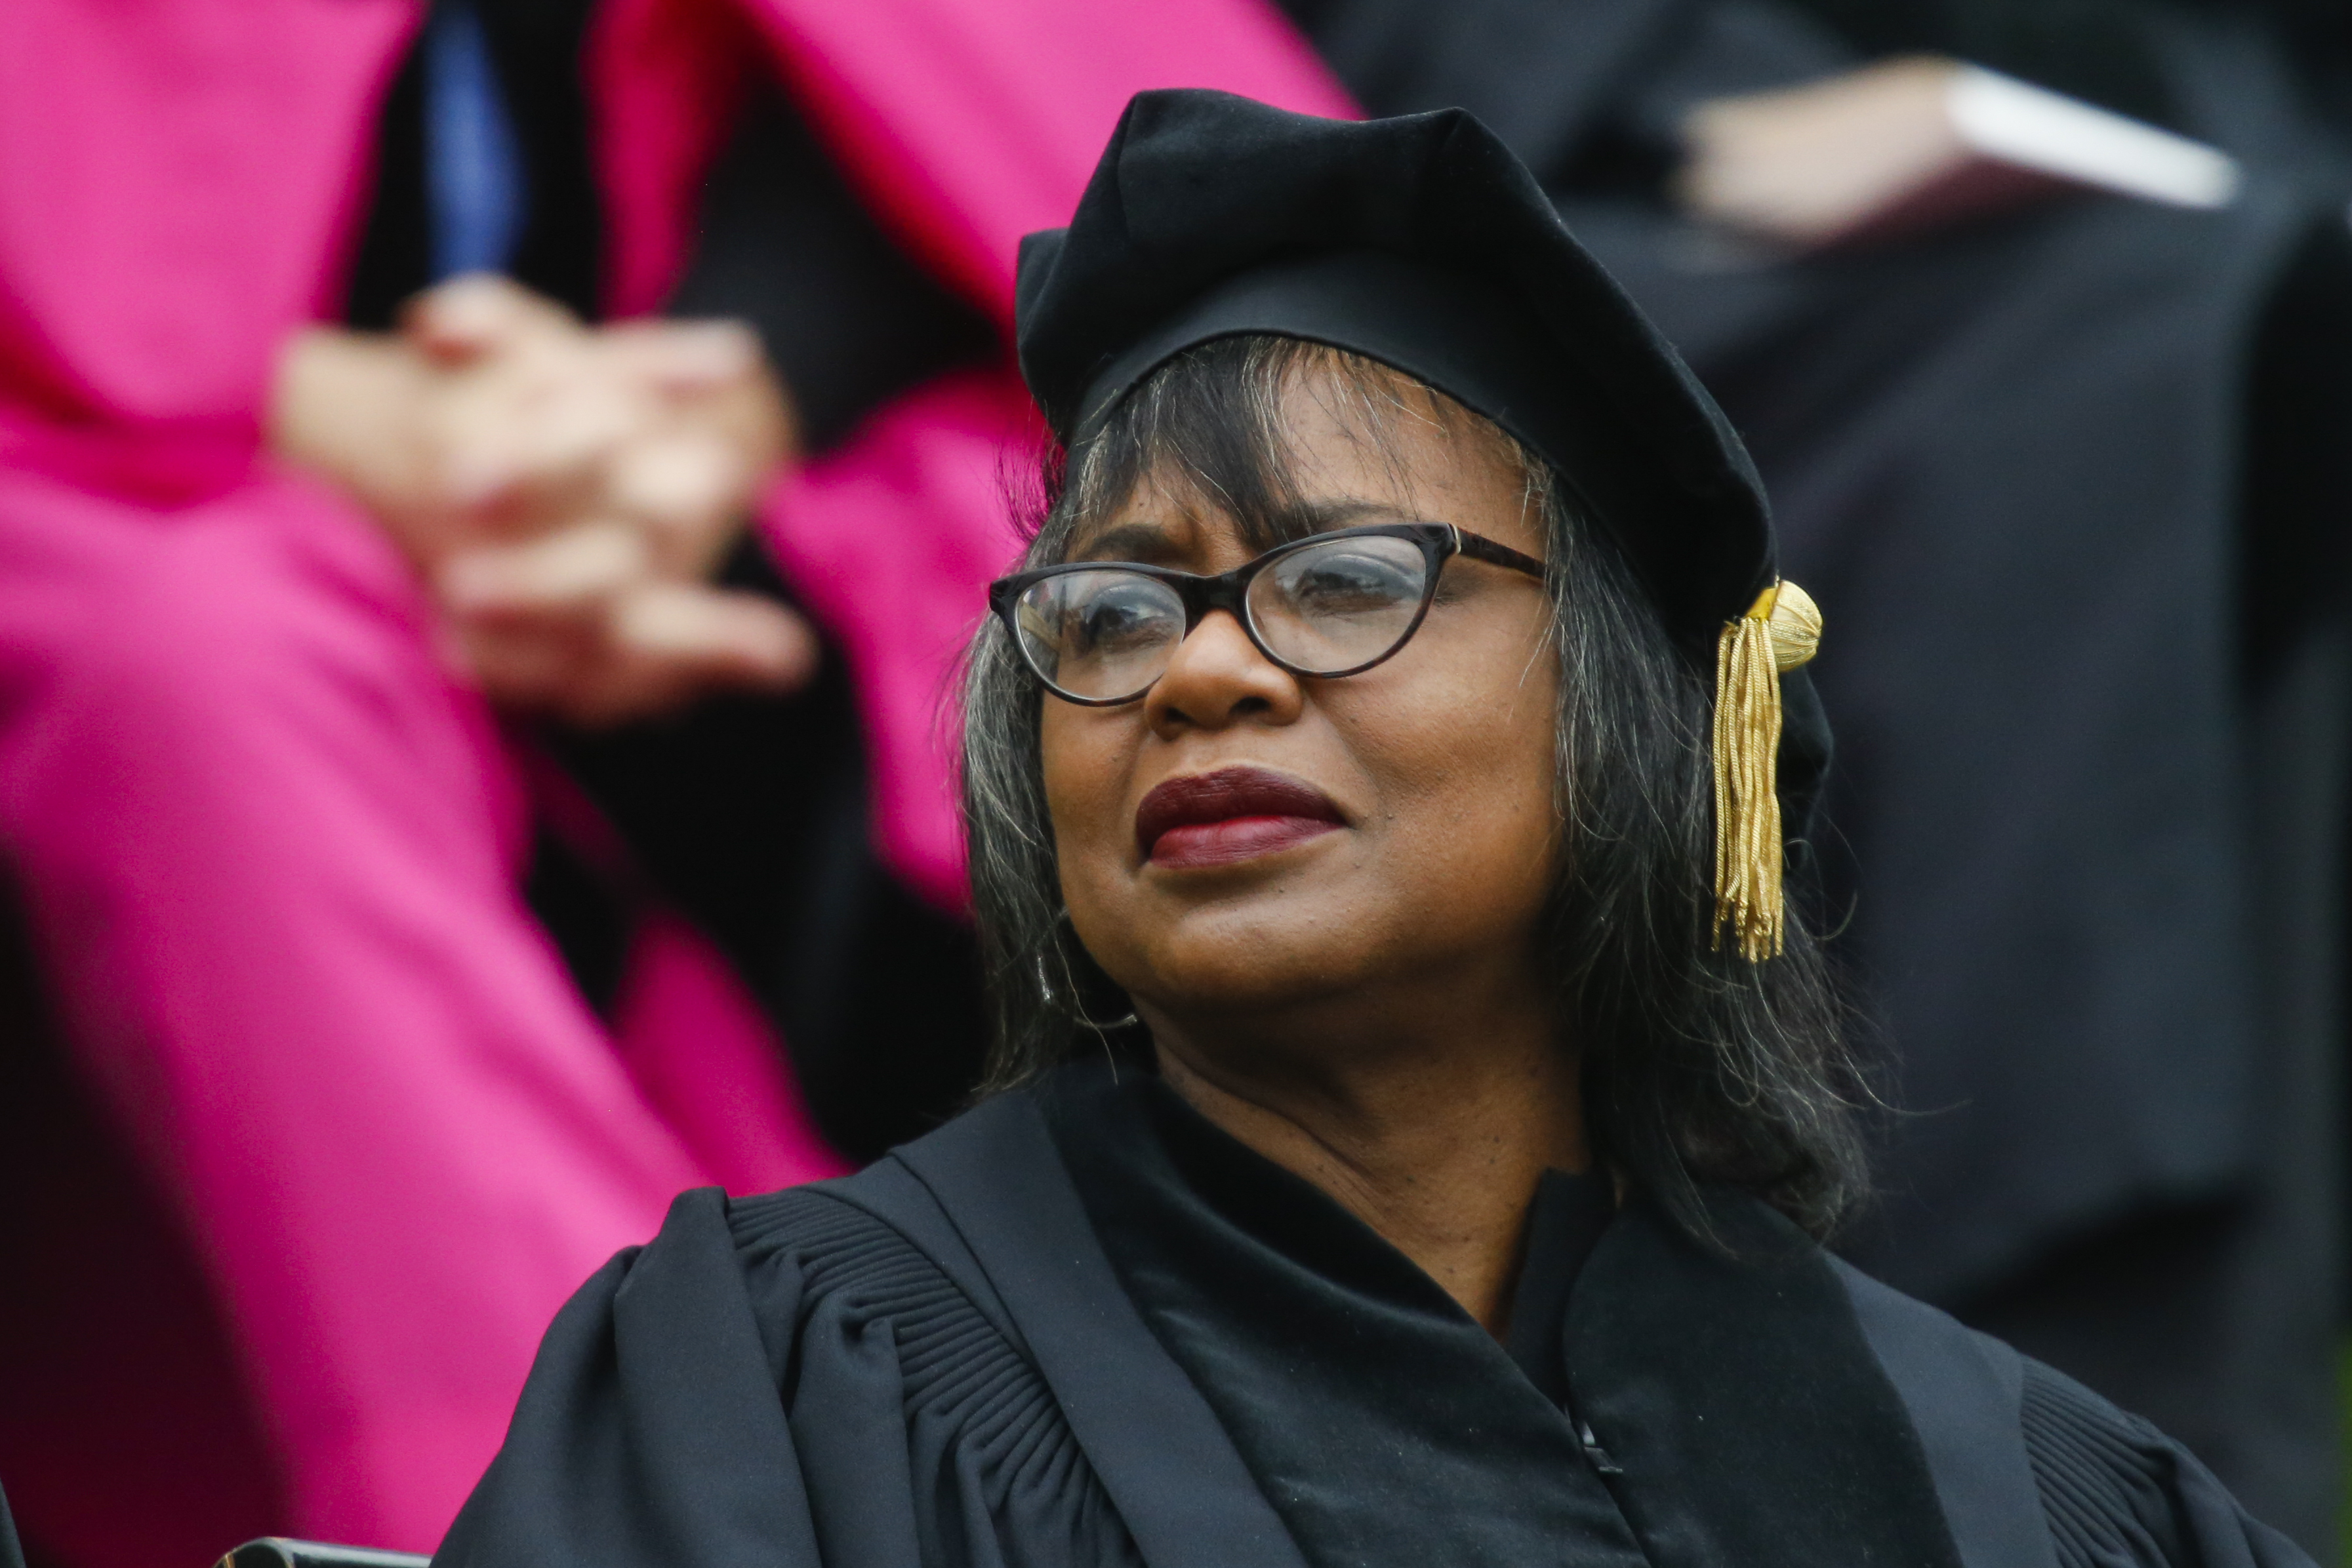 Law professor Anita Hill attends the commencement ceremony at Wesleyan University on May 27, 2018 in Middletown, Connecticut. (Eduardo Munoz Alvarez/Getty Images)